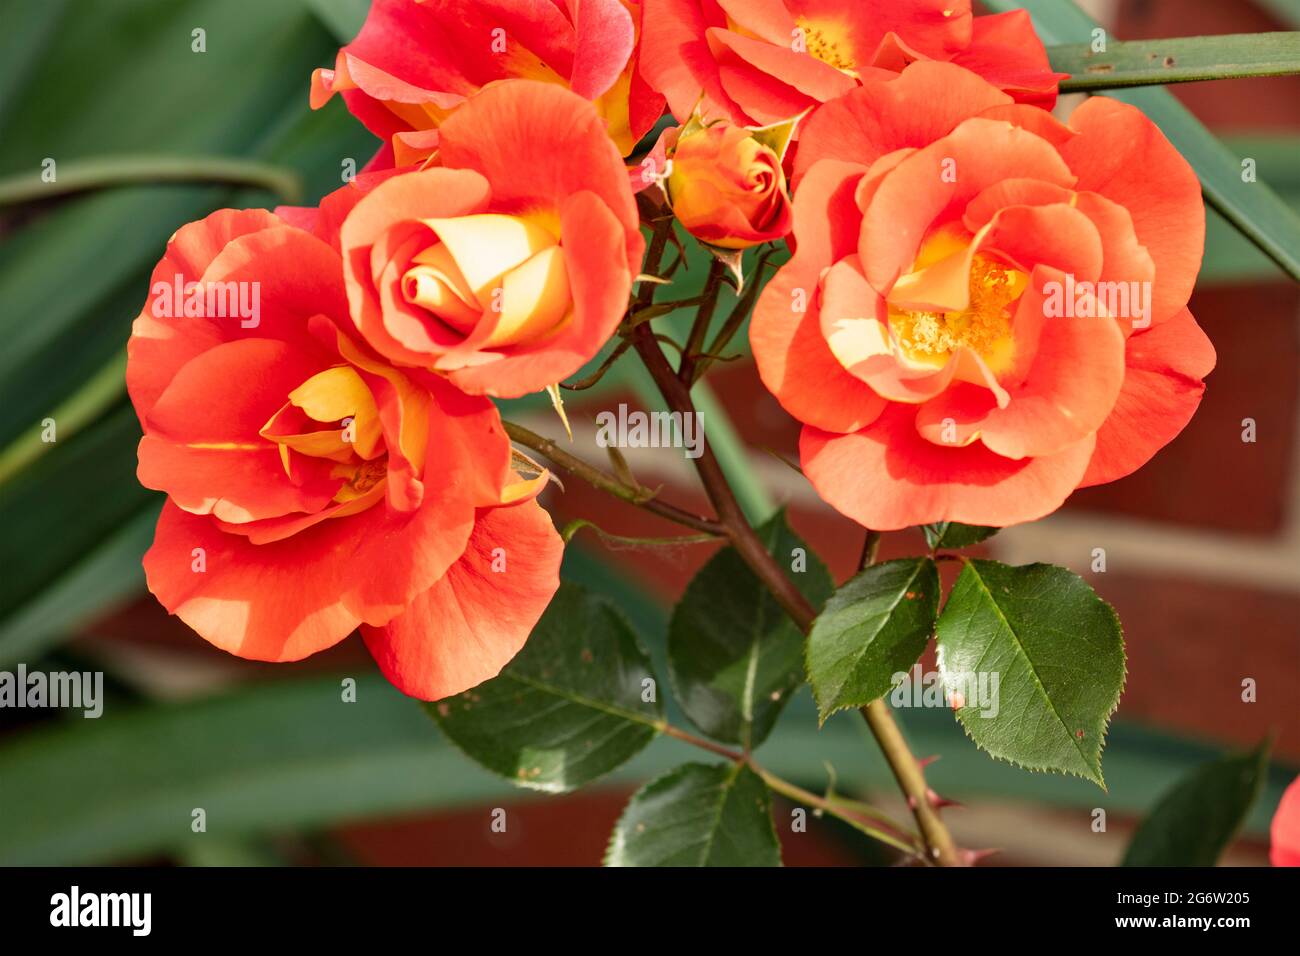 Romantic Rosa Bright and Breezy ‘Dicjive) flowering in a natural garden setting, natural flower portrait in close-up Stock Photo